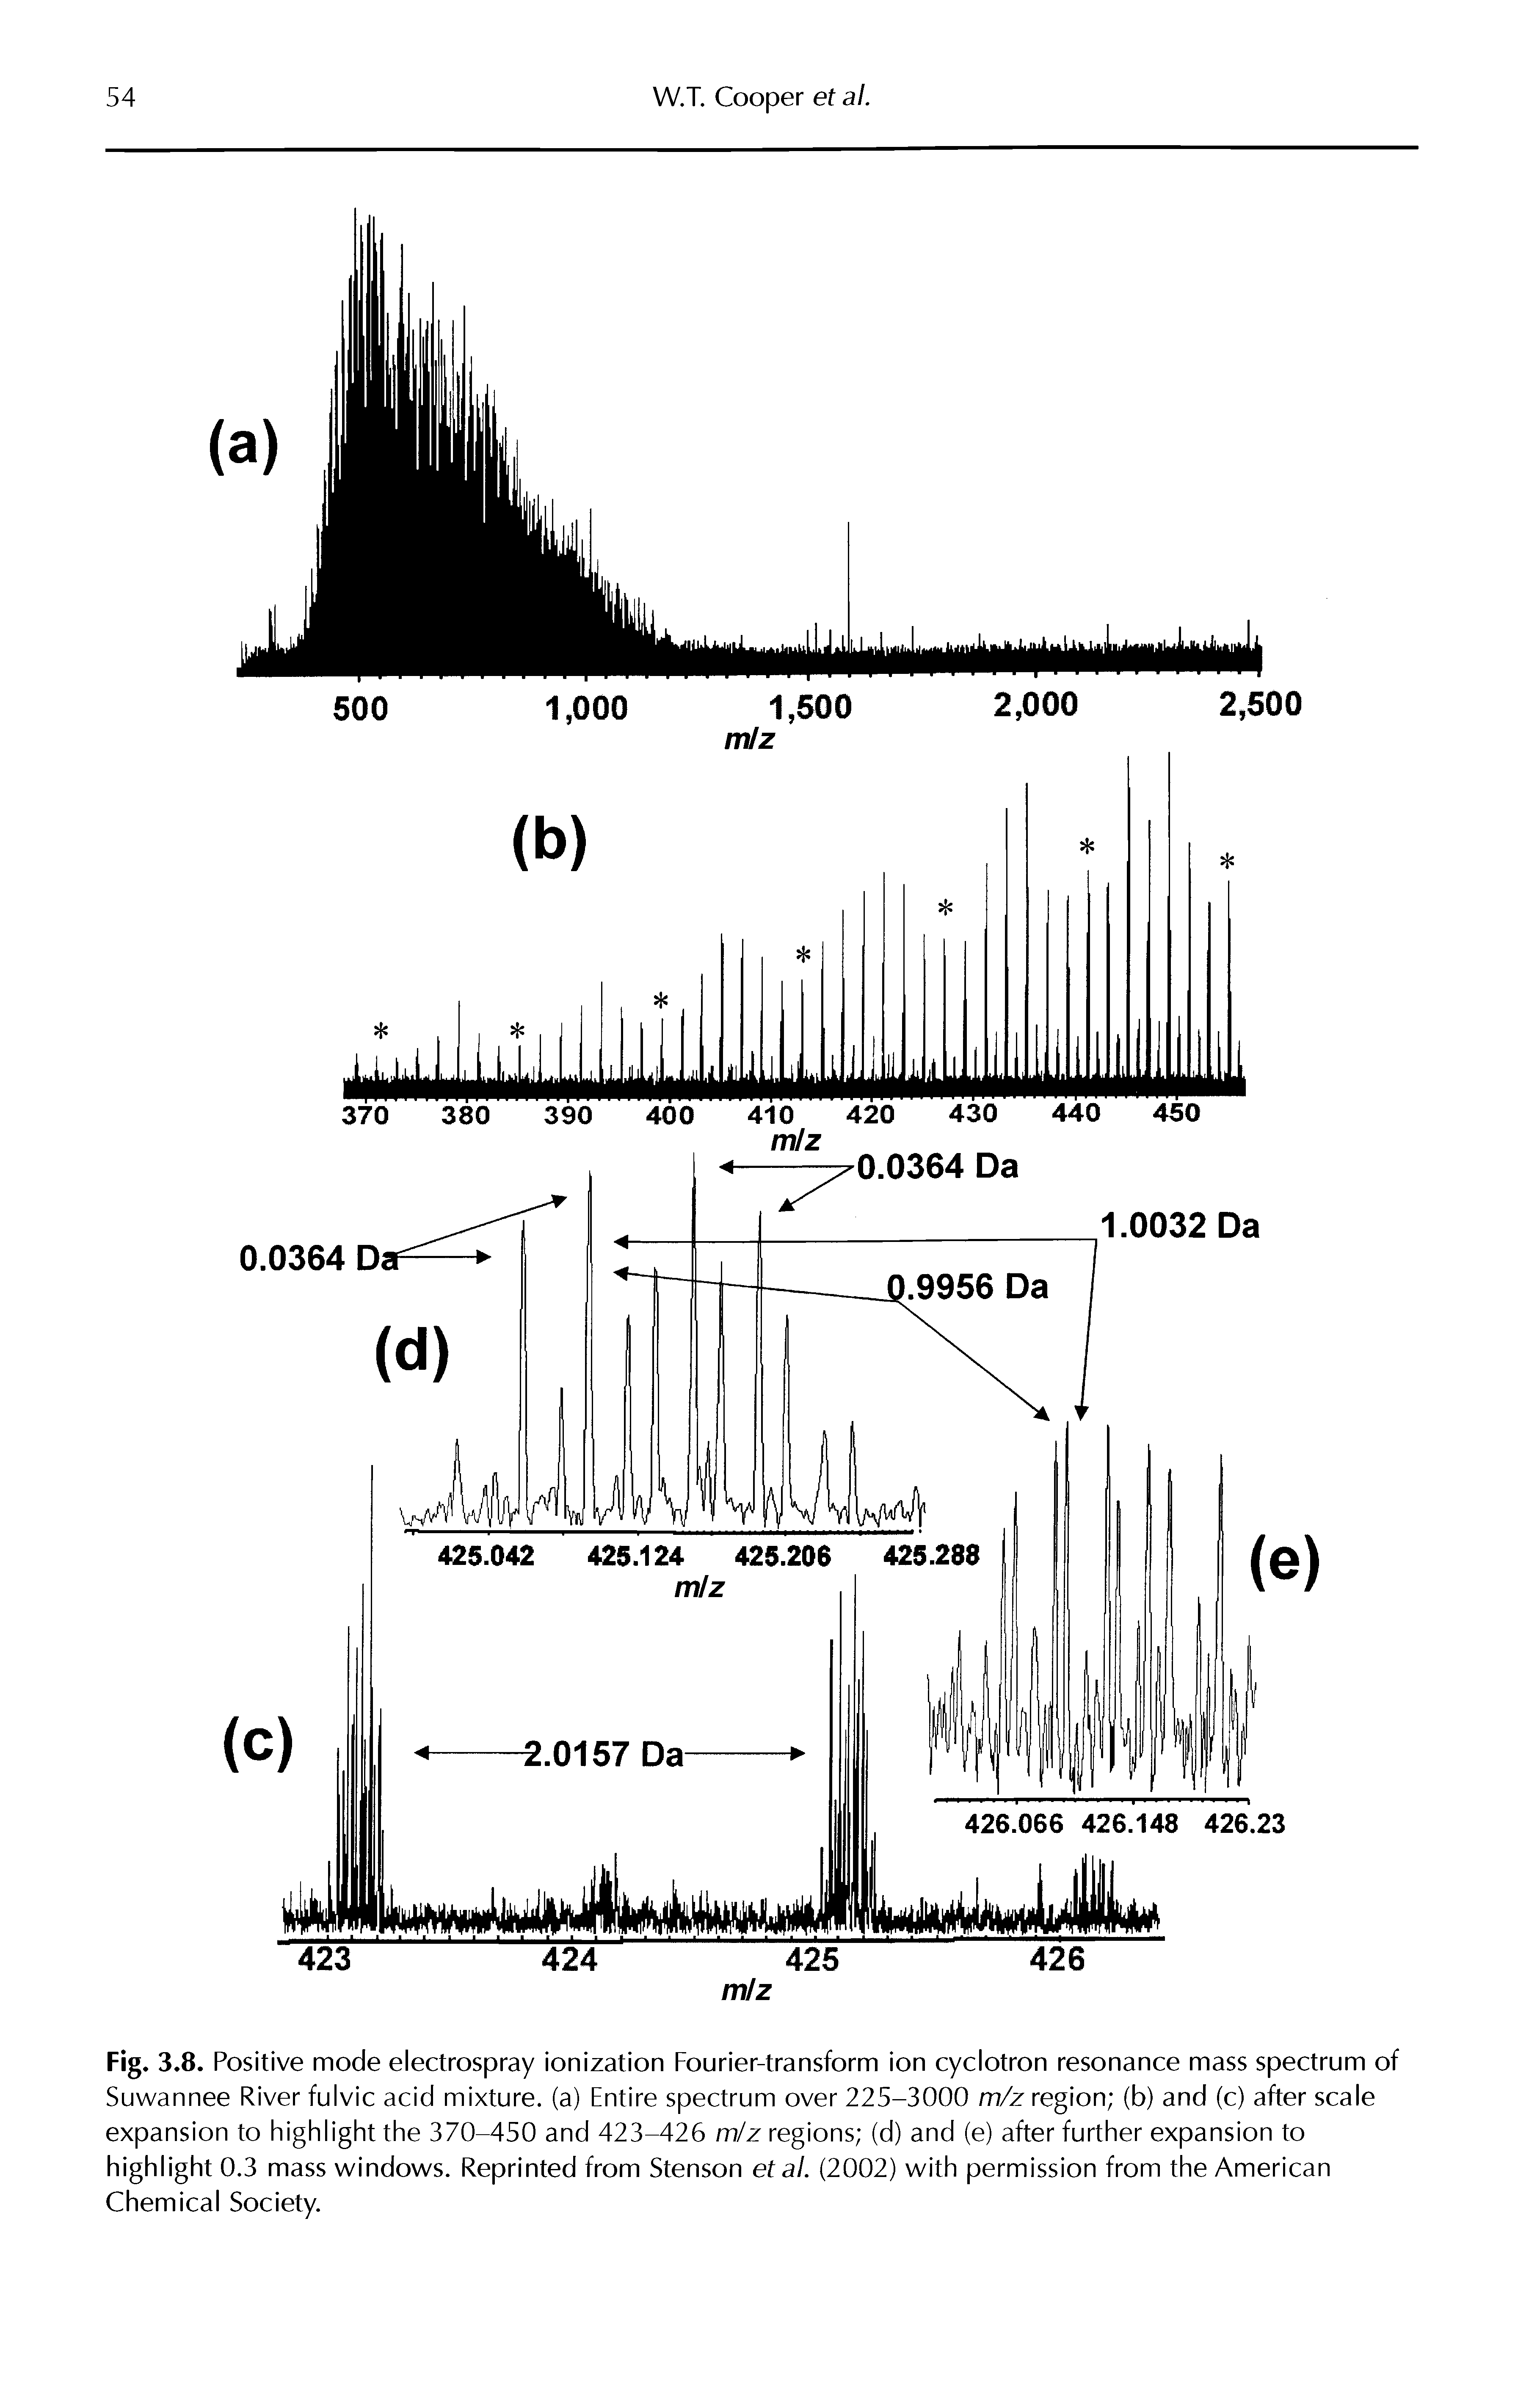 Fig. 3.8. Positive mode electrospray ionization Fourier-transform ion cyclotron resonance mass spectrum of Suwannee River fulvic acid mixture, (a) Entire spectrum over 225-3000 m/z region (b) and (c) after scale expansion to highlight the 370-450 and 423-426 m/z regions (d) and (e) after further expansion to highlight 0.3 mass windows. Reprinted from Stenson etal. (2002) with permission from the American Chemical Society.